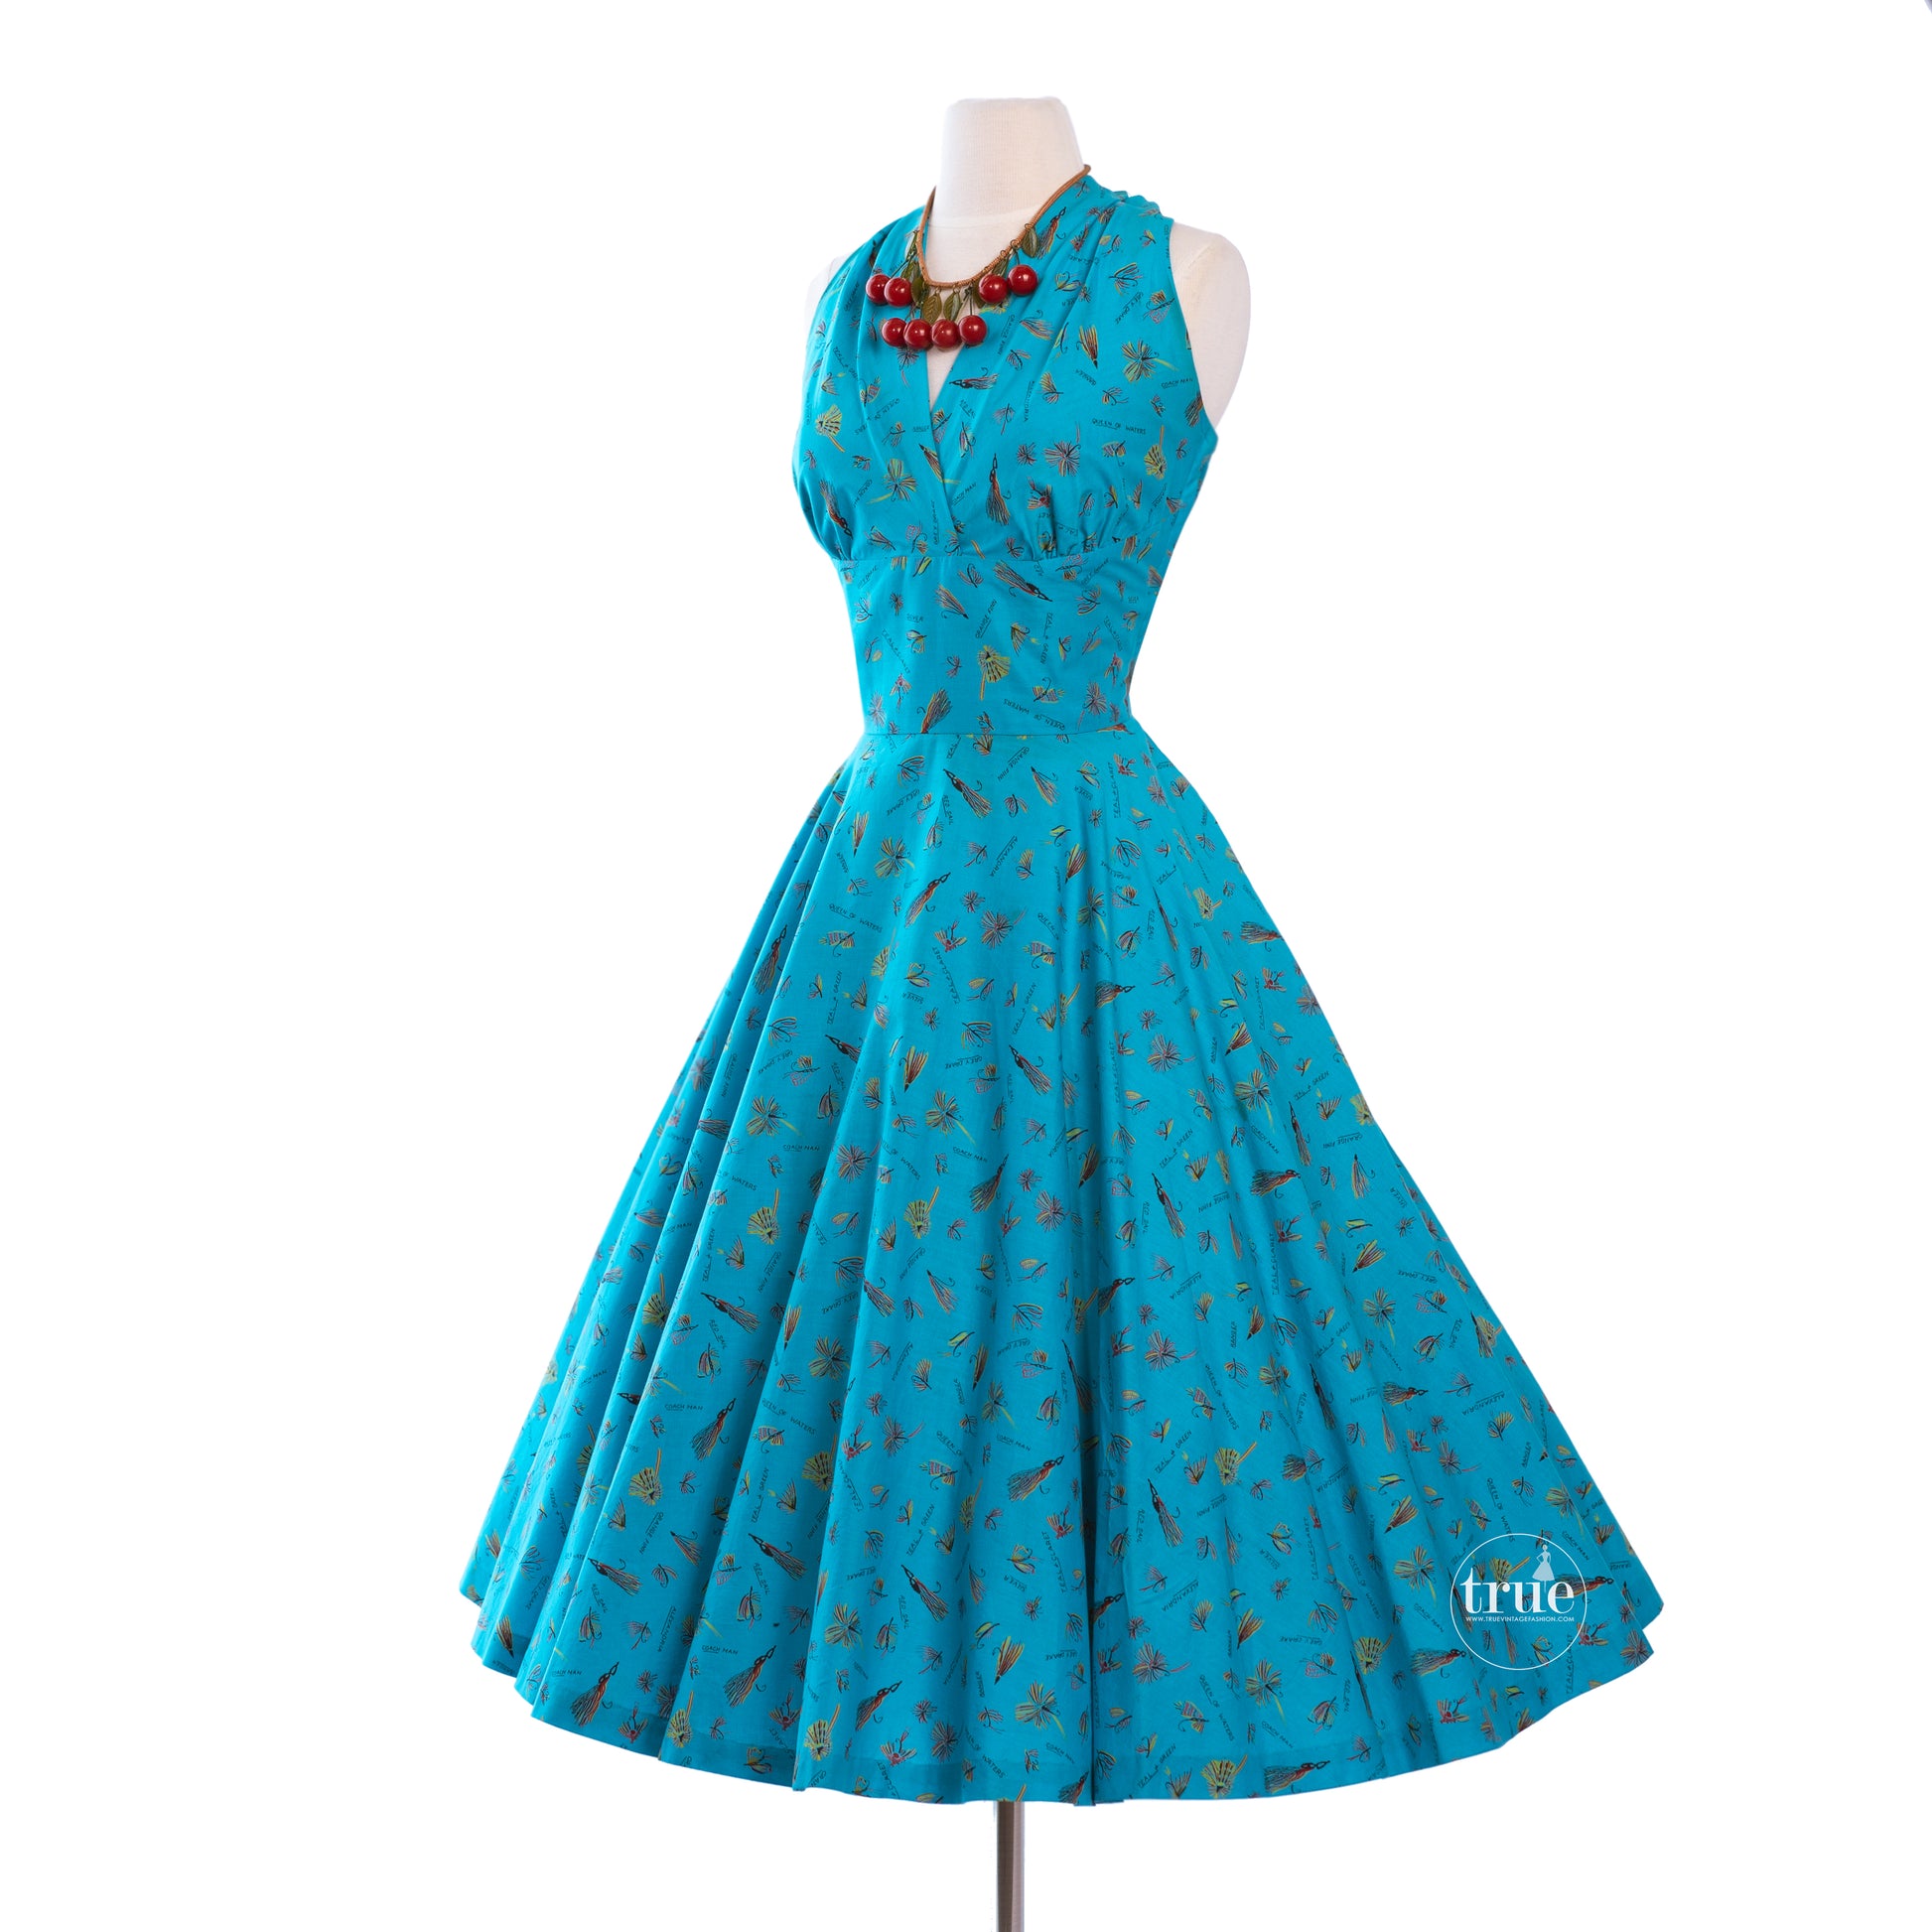 vintage 1950's COVER GIRL of MIAMI cotton fishing lures novelty print halter dress with FULL CIRCLE skirt